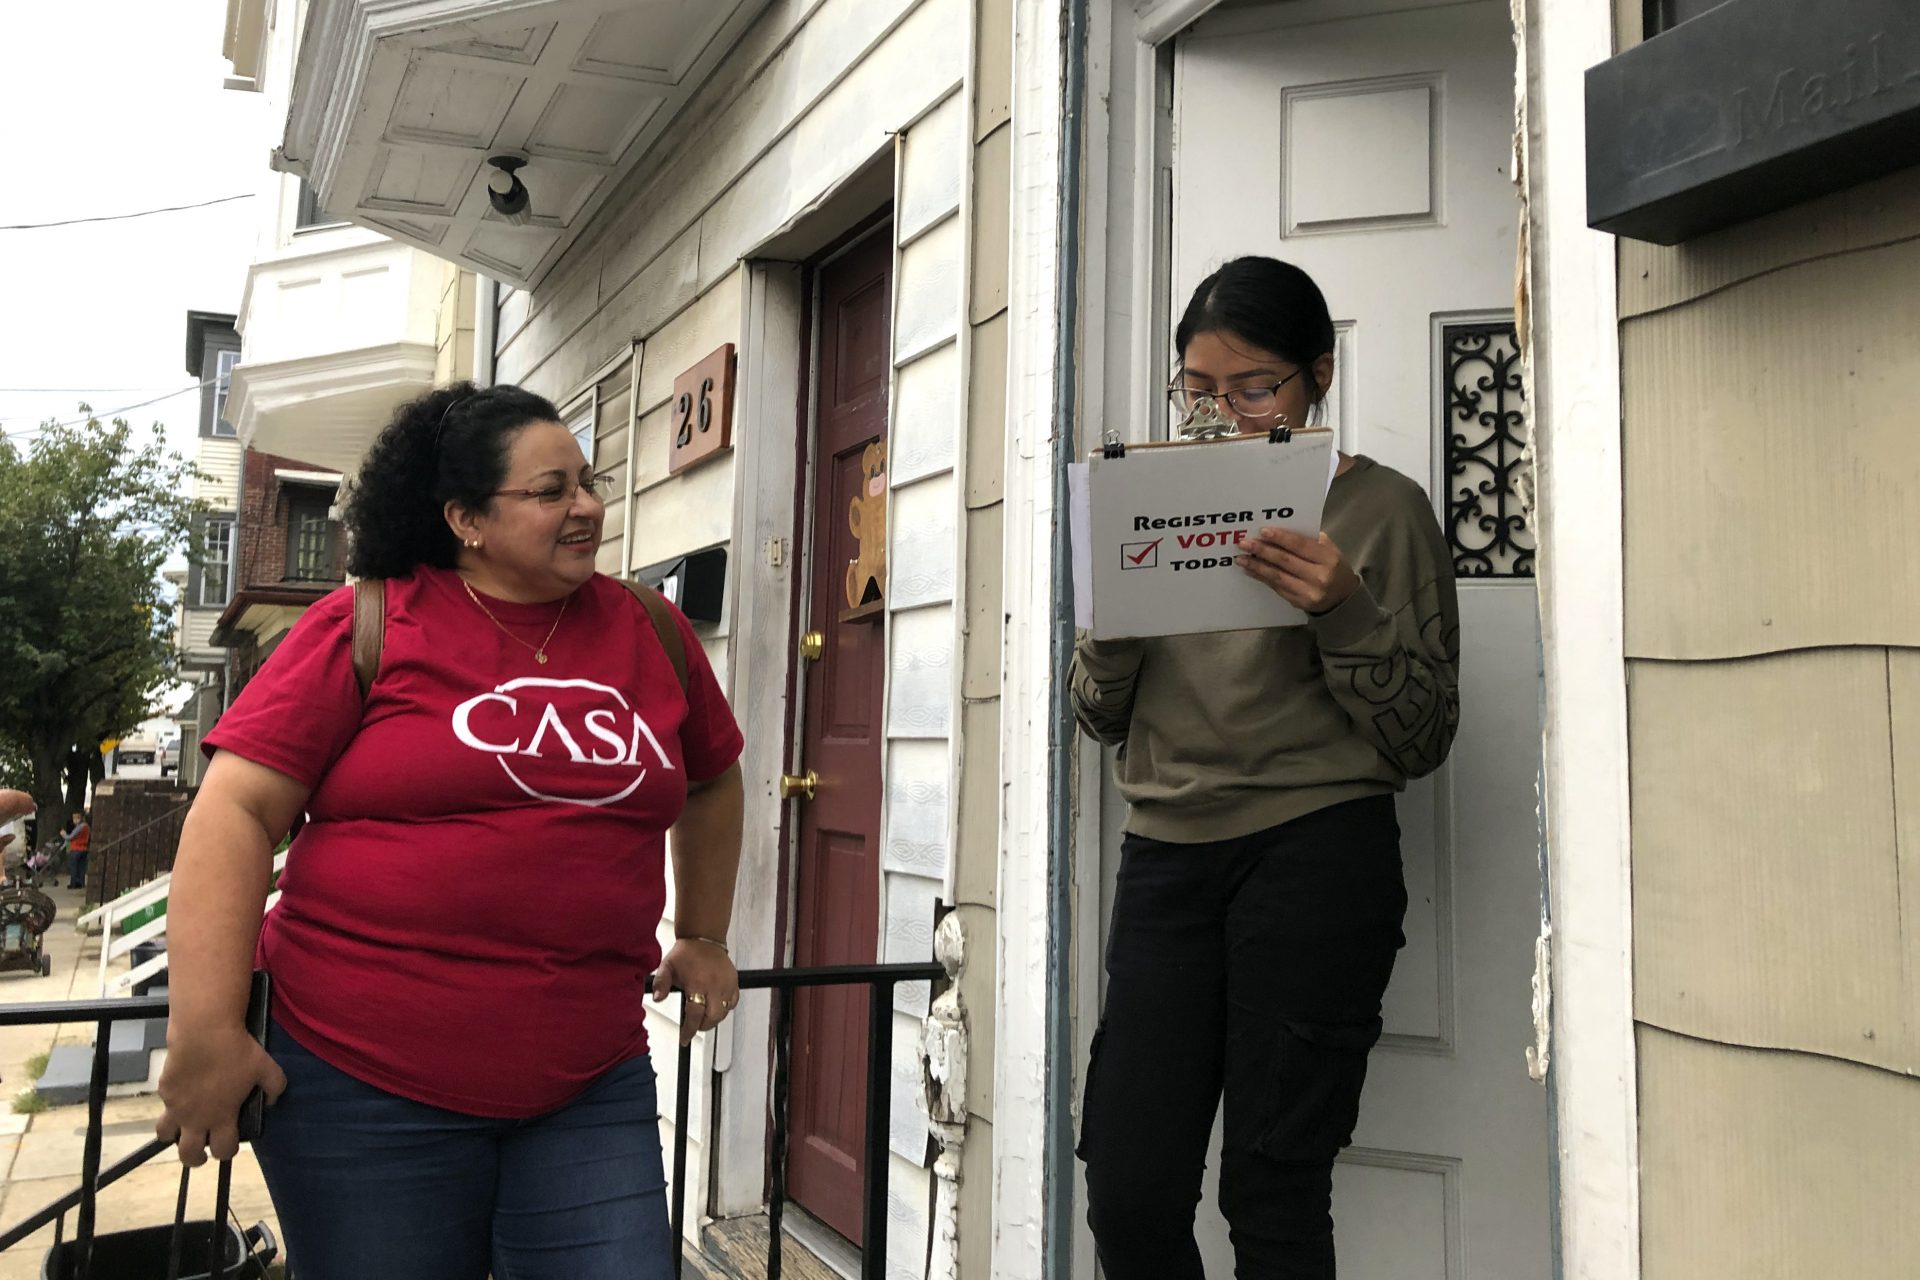 Mirna Orellana, left, a community organizer from the non-profit group We Are Casa, helps Karyme Navarro, right, fill out a voter registration form in York, Pa., on Sept. 30, 2019. Democrats are counting on Hispanics so enraged by President Donald Trump’s anti-immigrant rhetoric that they’ll turn out in force to deny him a second term, but Trump’s reelection campaign has launched its own Hispanic outreach efforts in non-traditional places like Pennsylvania, arguing that even slim gains could decide the 2020 race.